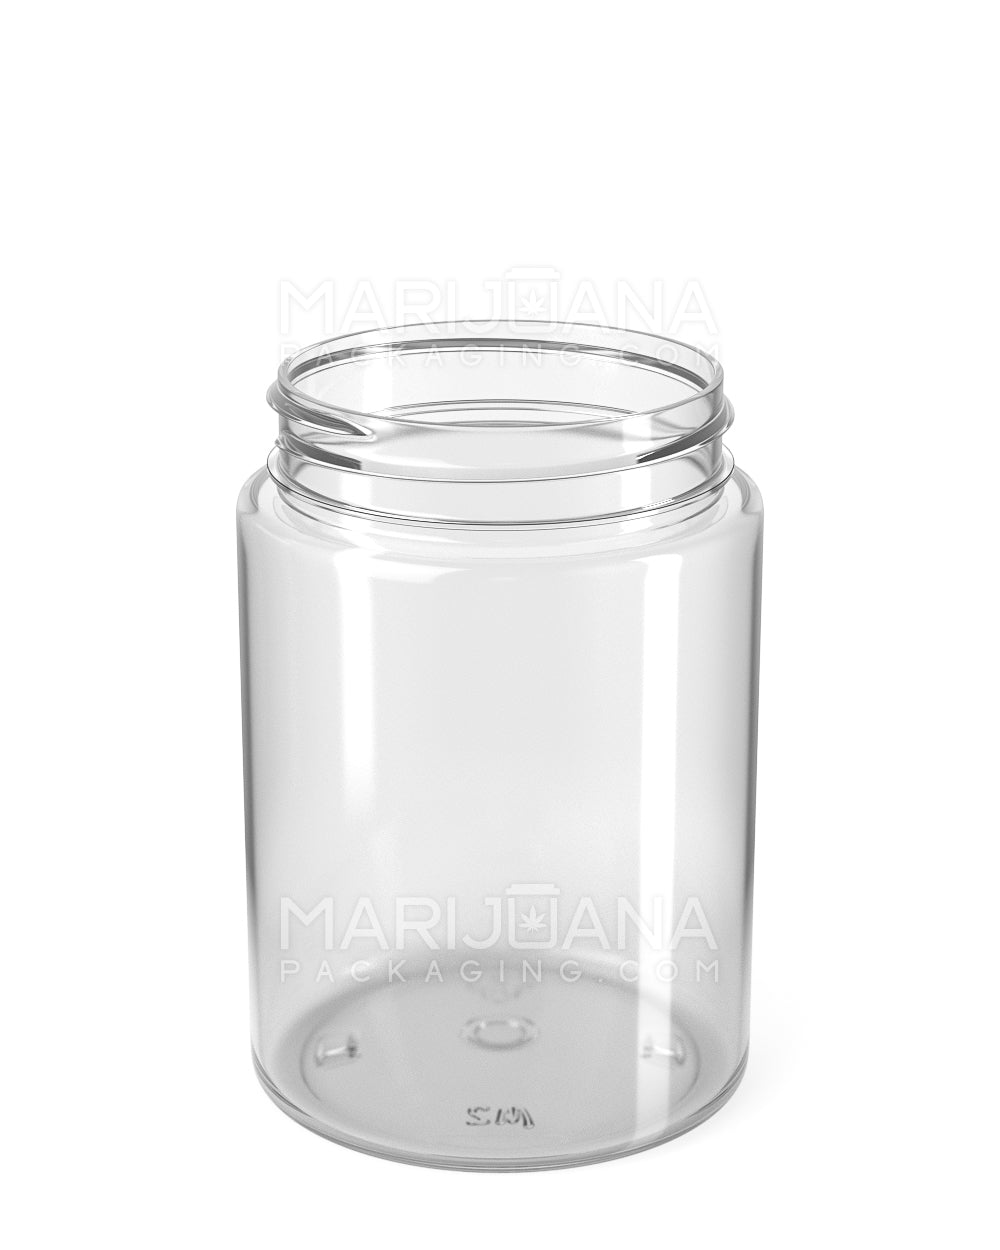 Straight Sided Clear Plastic Jars | 53mm - 6oz - 80 Count